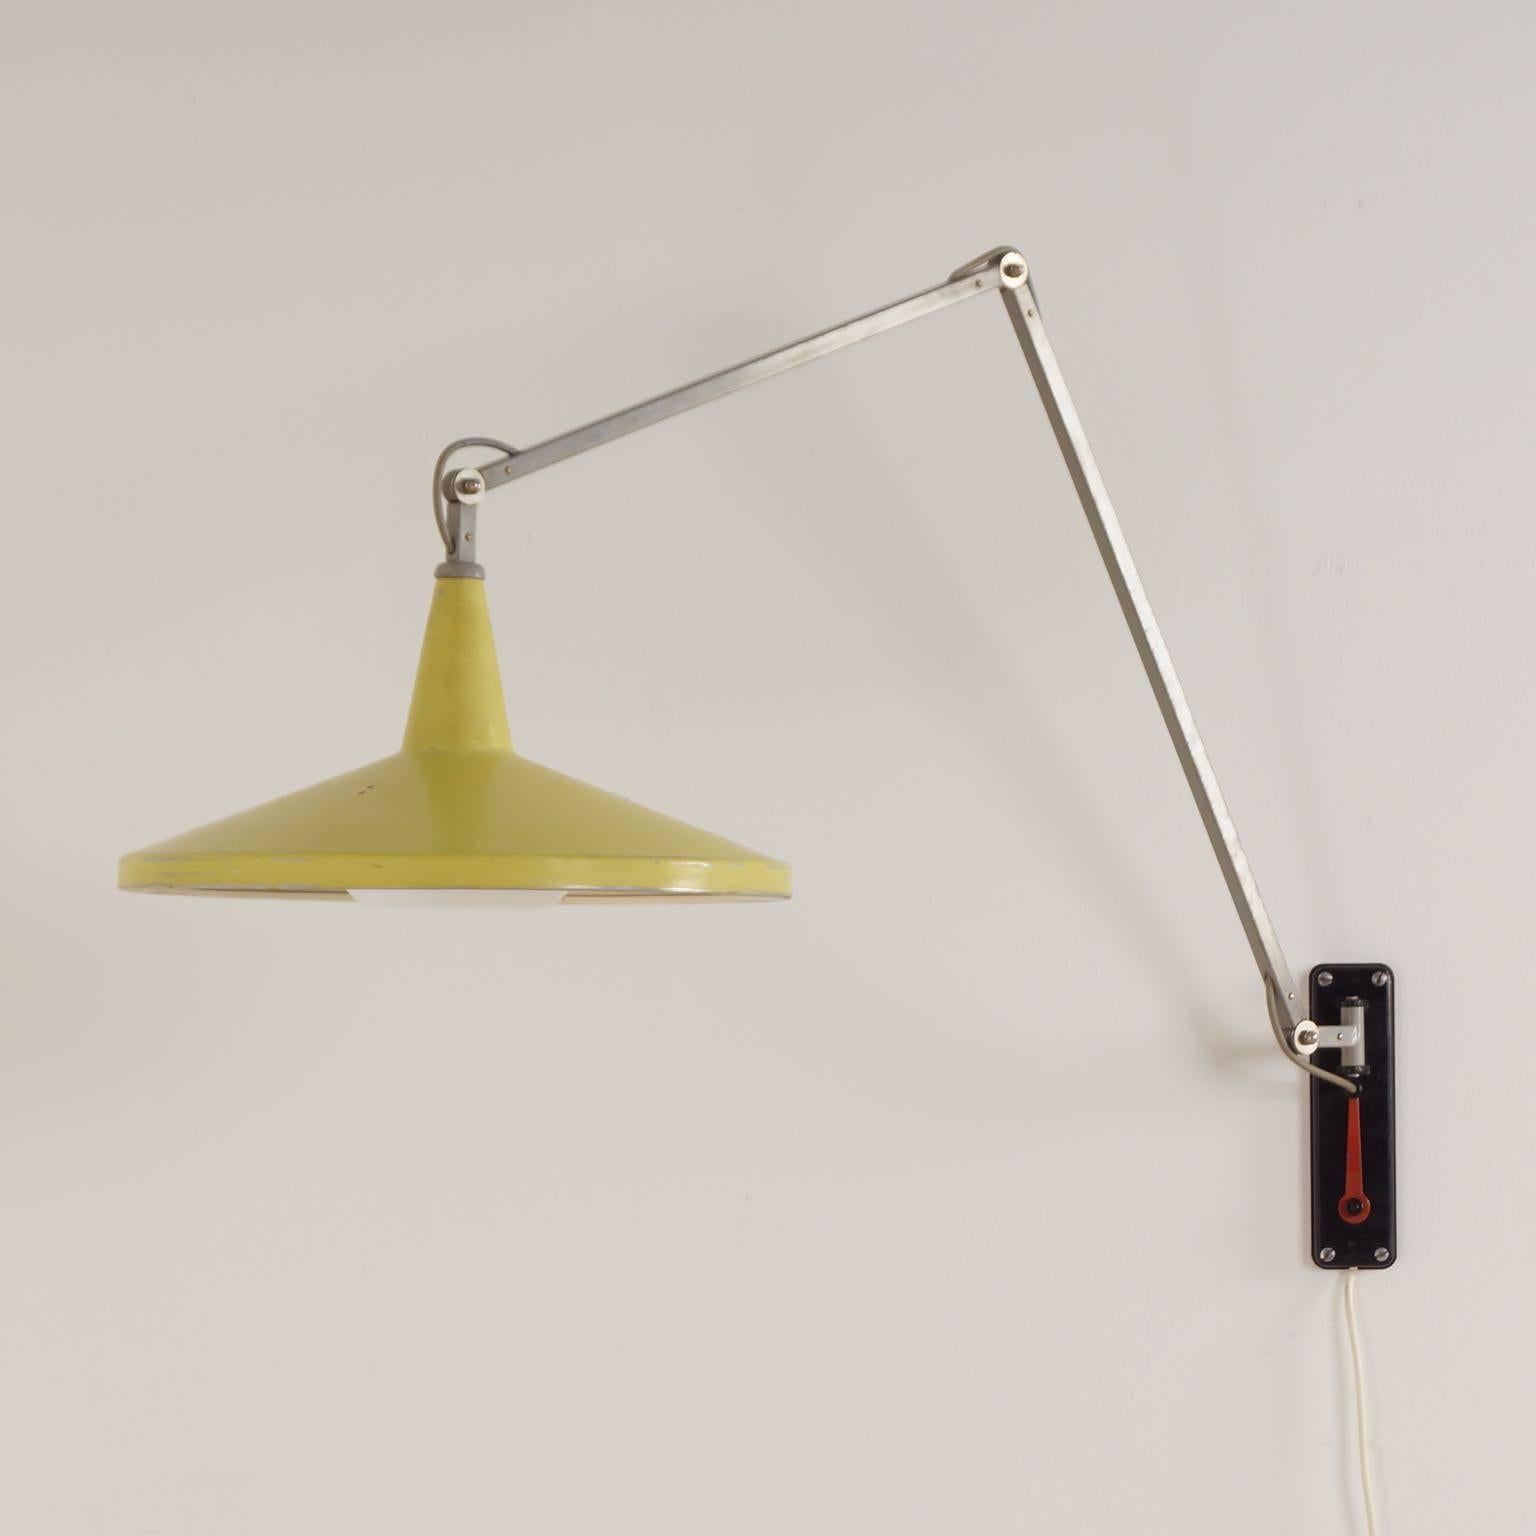 Rare yellow Panama wall lamp model no. 4050 by Wim Rietveld for Gispen in 1956. The lamp has three hinges, so it can be put in different positions (with the red key, attached to the wall plate). The hood is yellow and has the shape of a hat and is